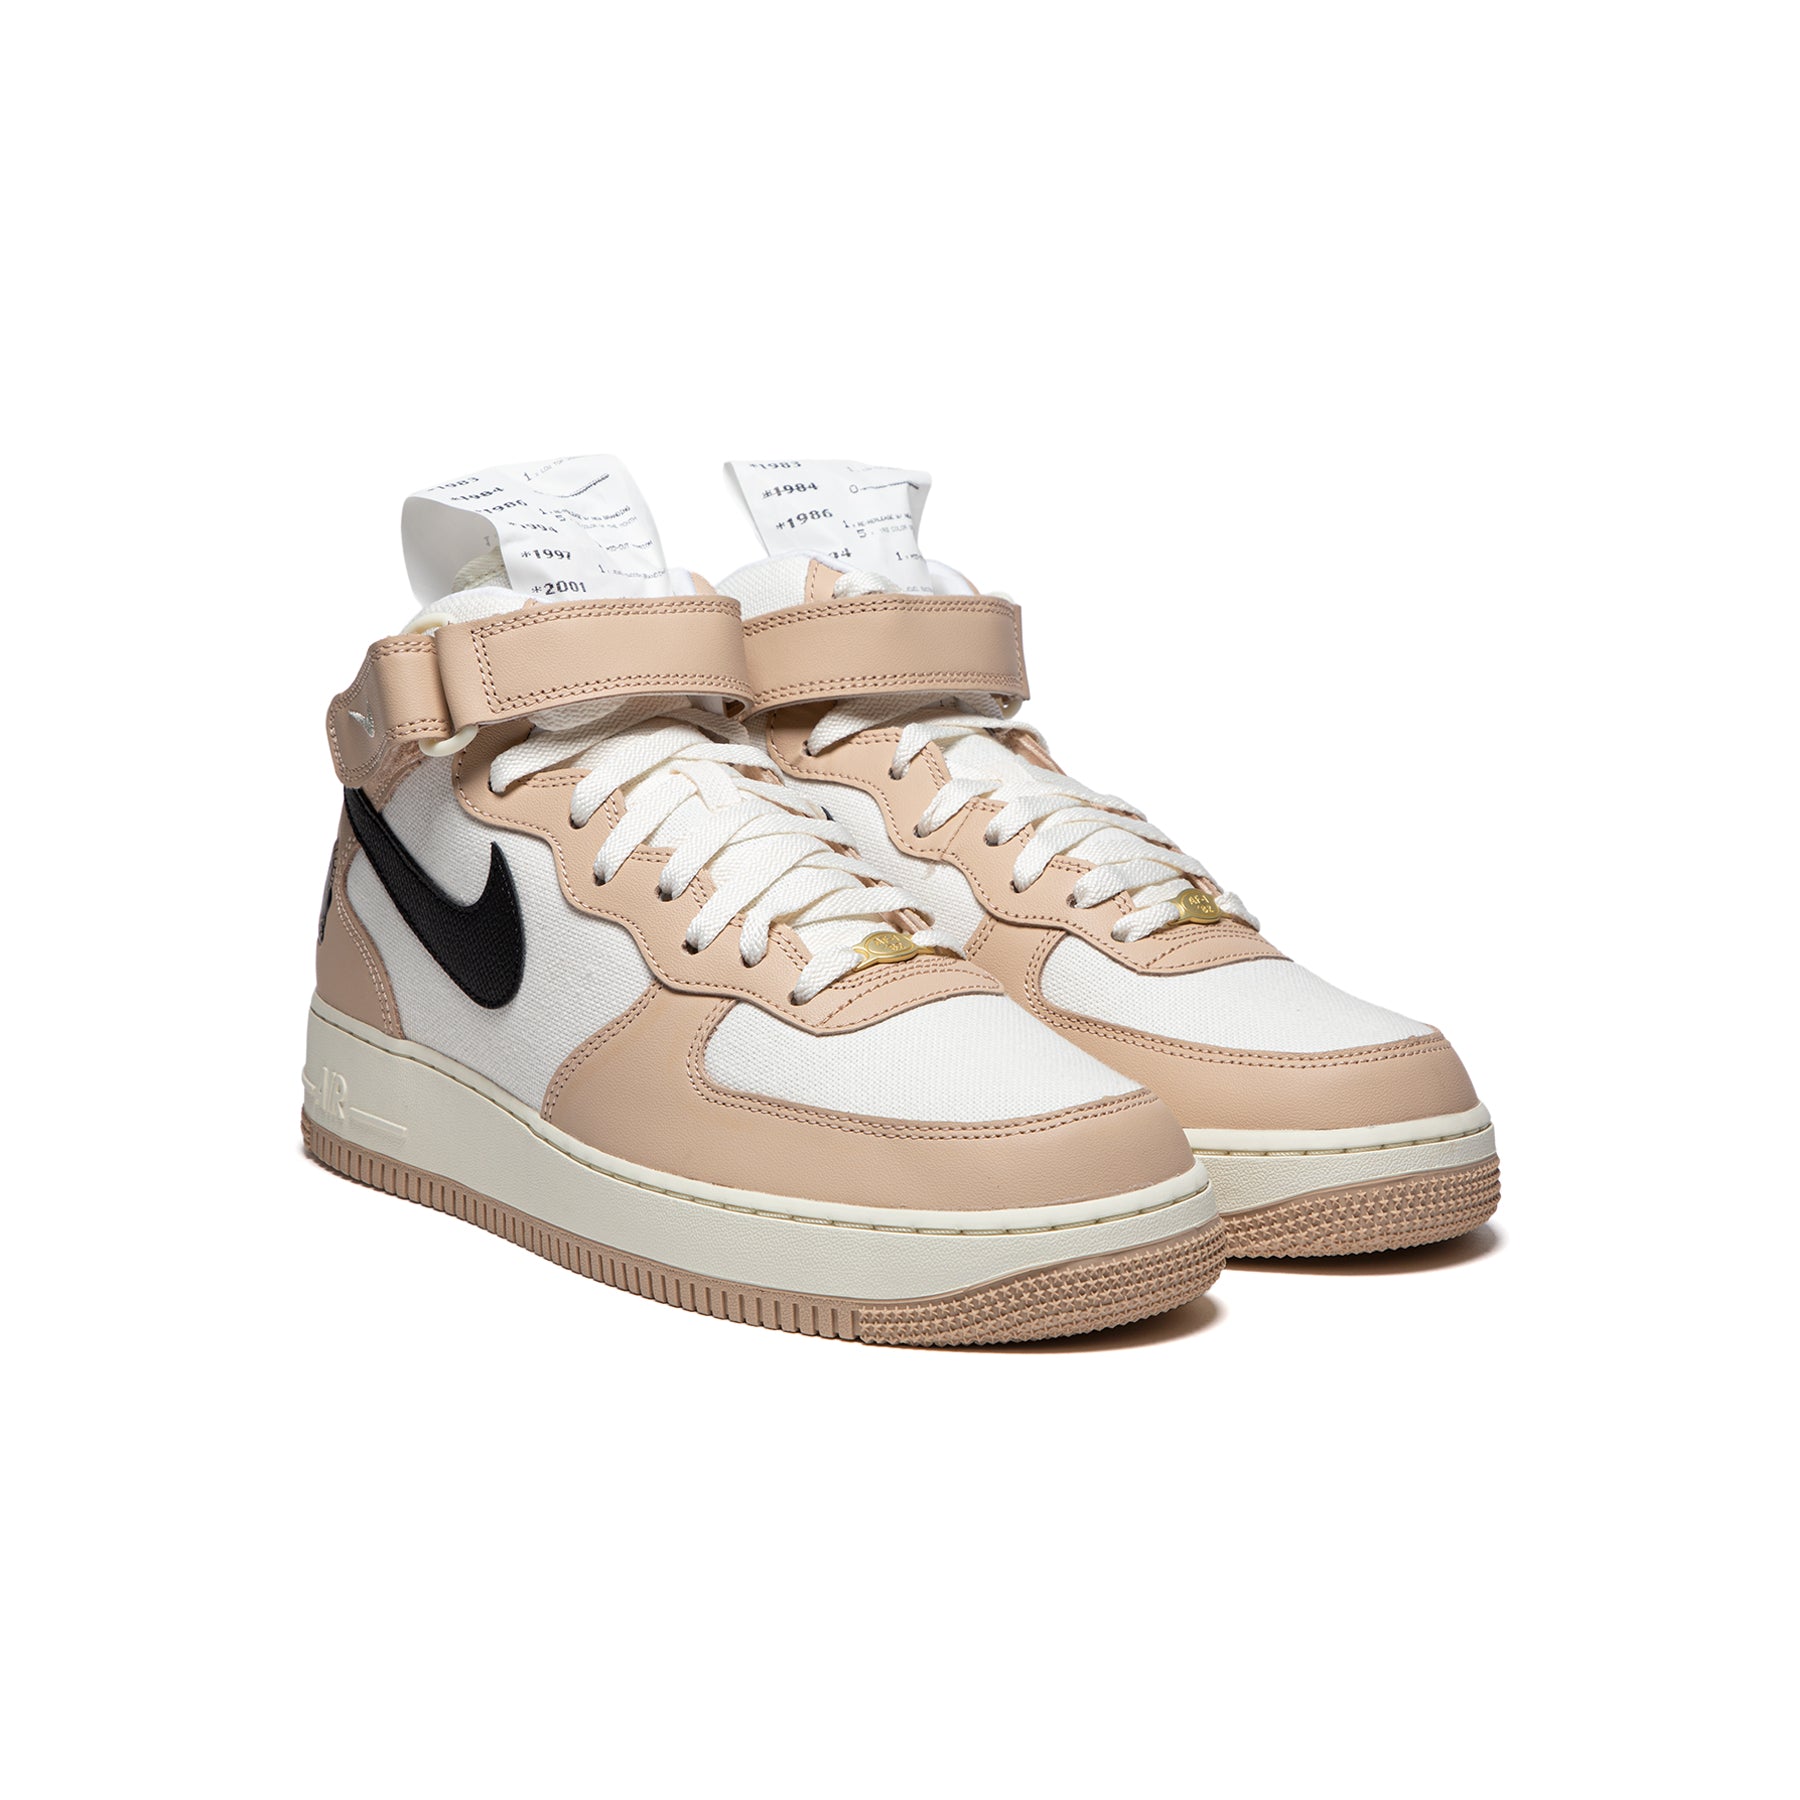 Nike Air Force 1 Mid '07 LX - Shimmer / Black / Pale Ivory